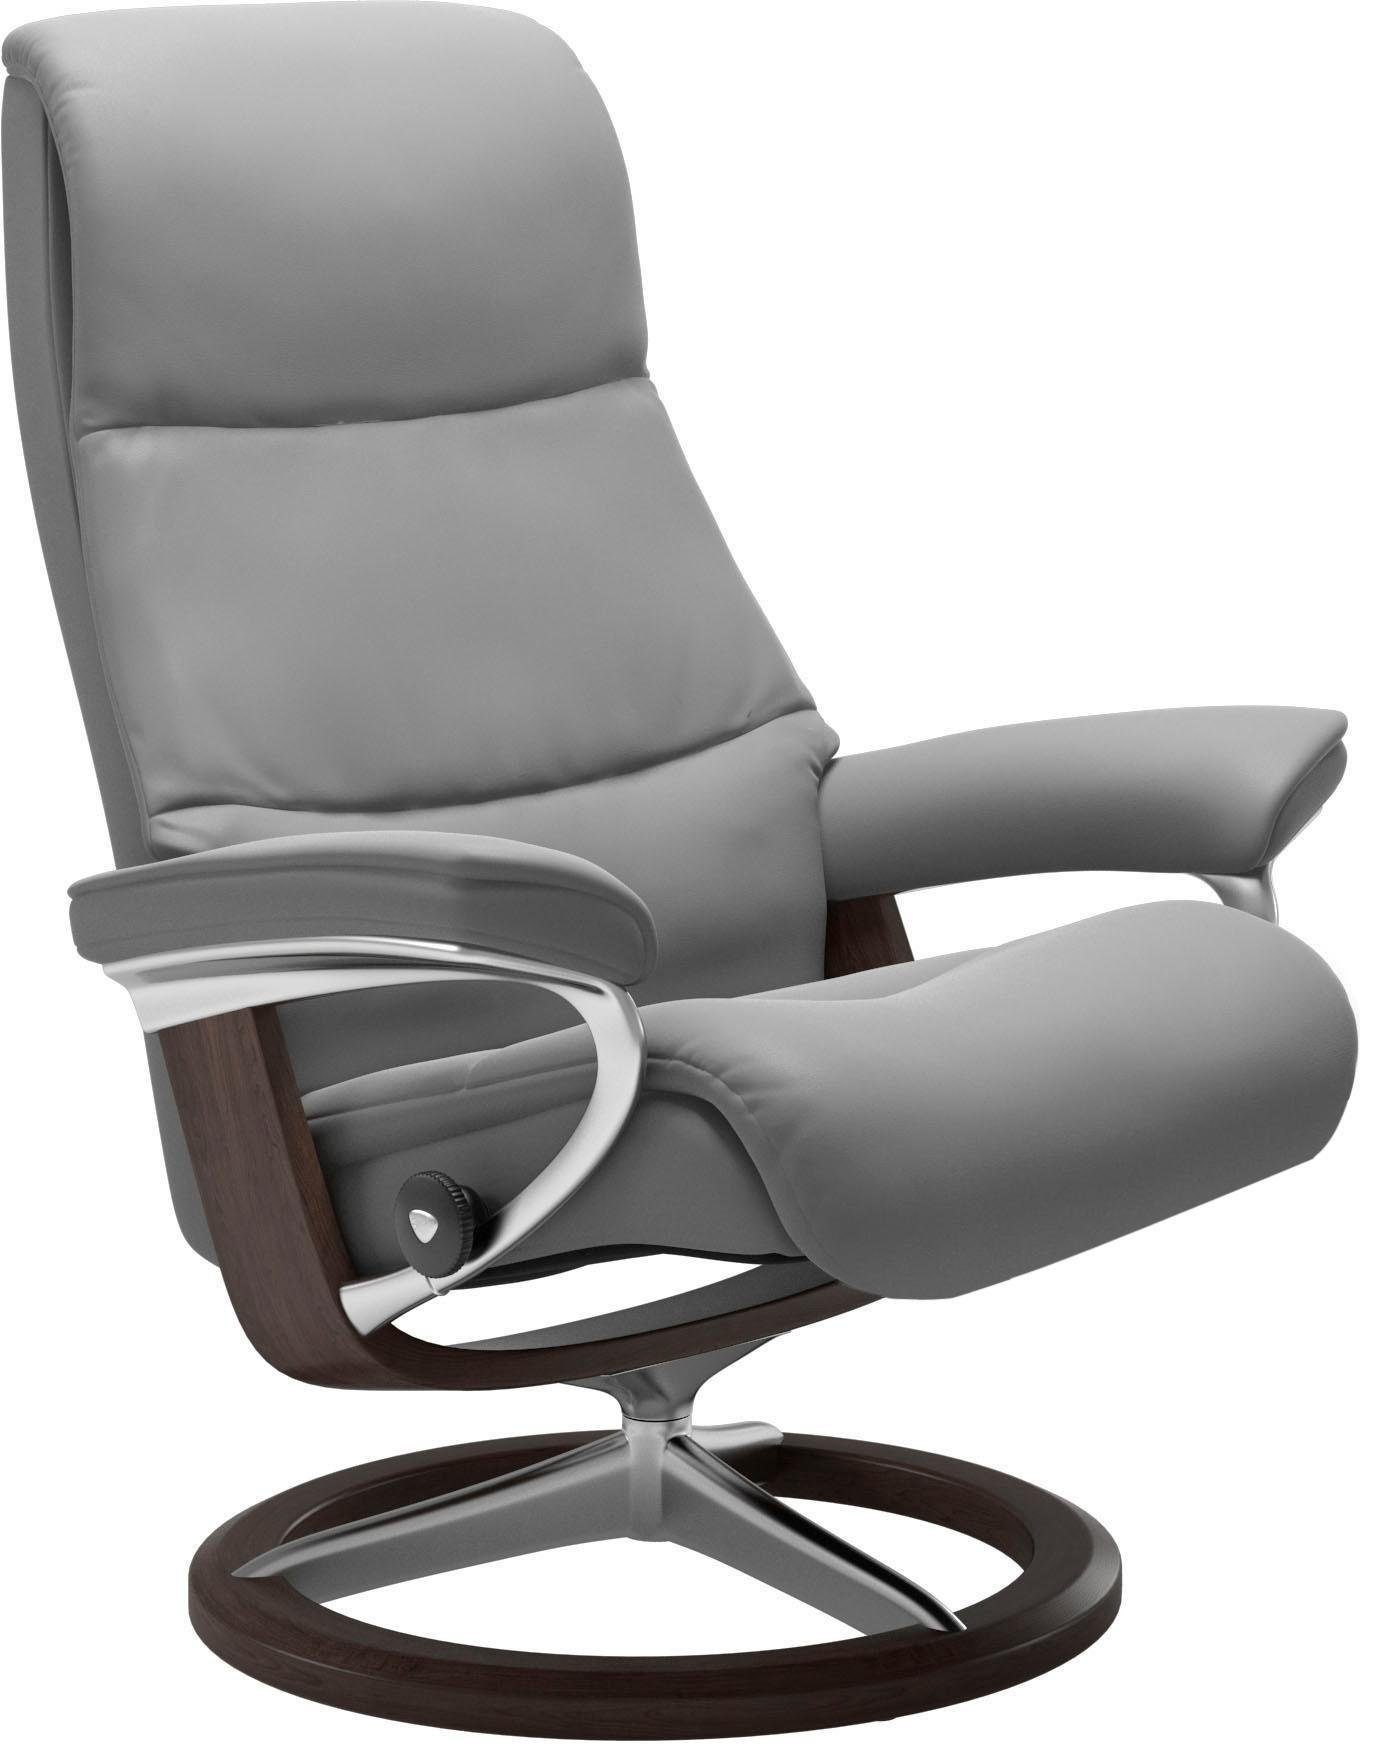 View, Signature Wenge Größe S,Gestell Relaxsessel mit Stressless® Base,